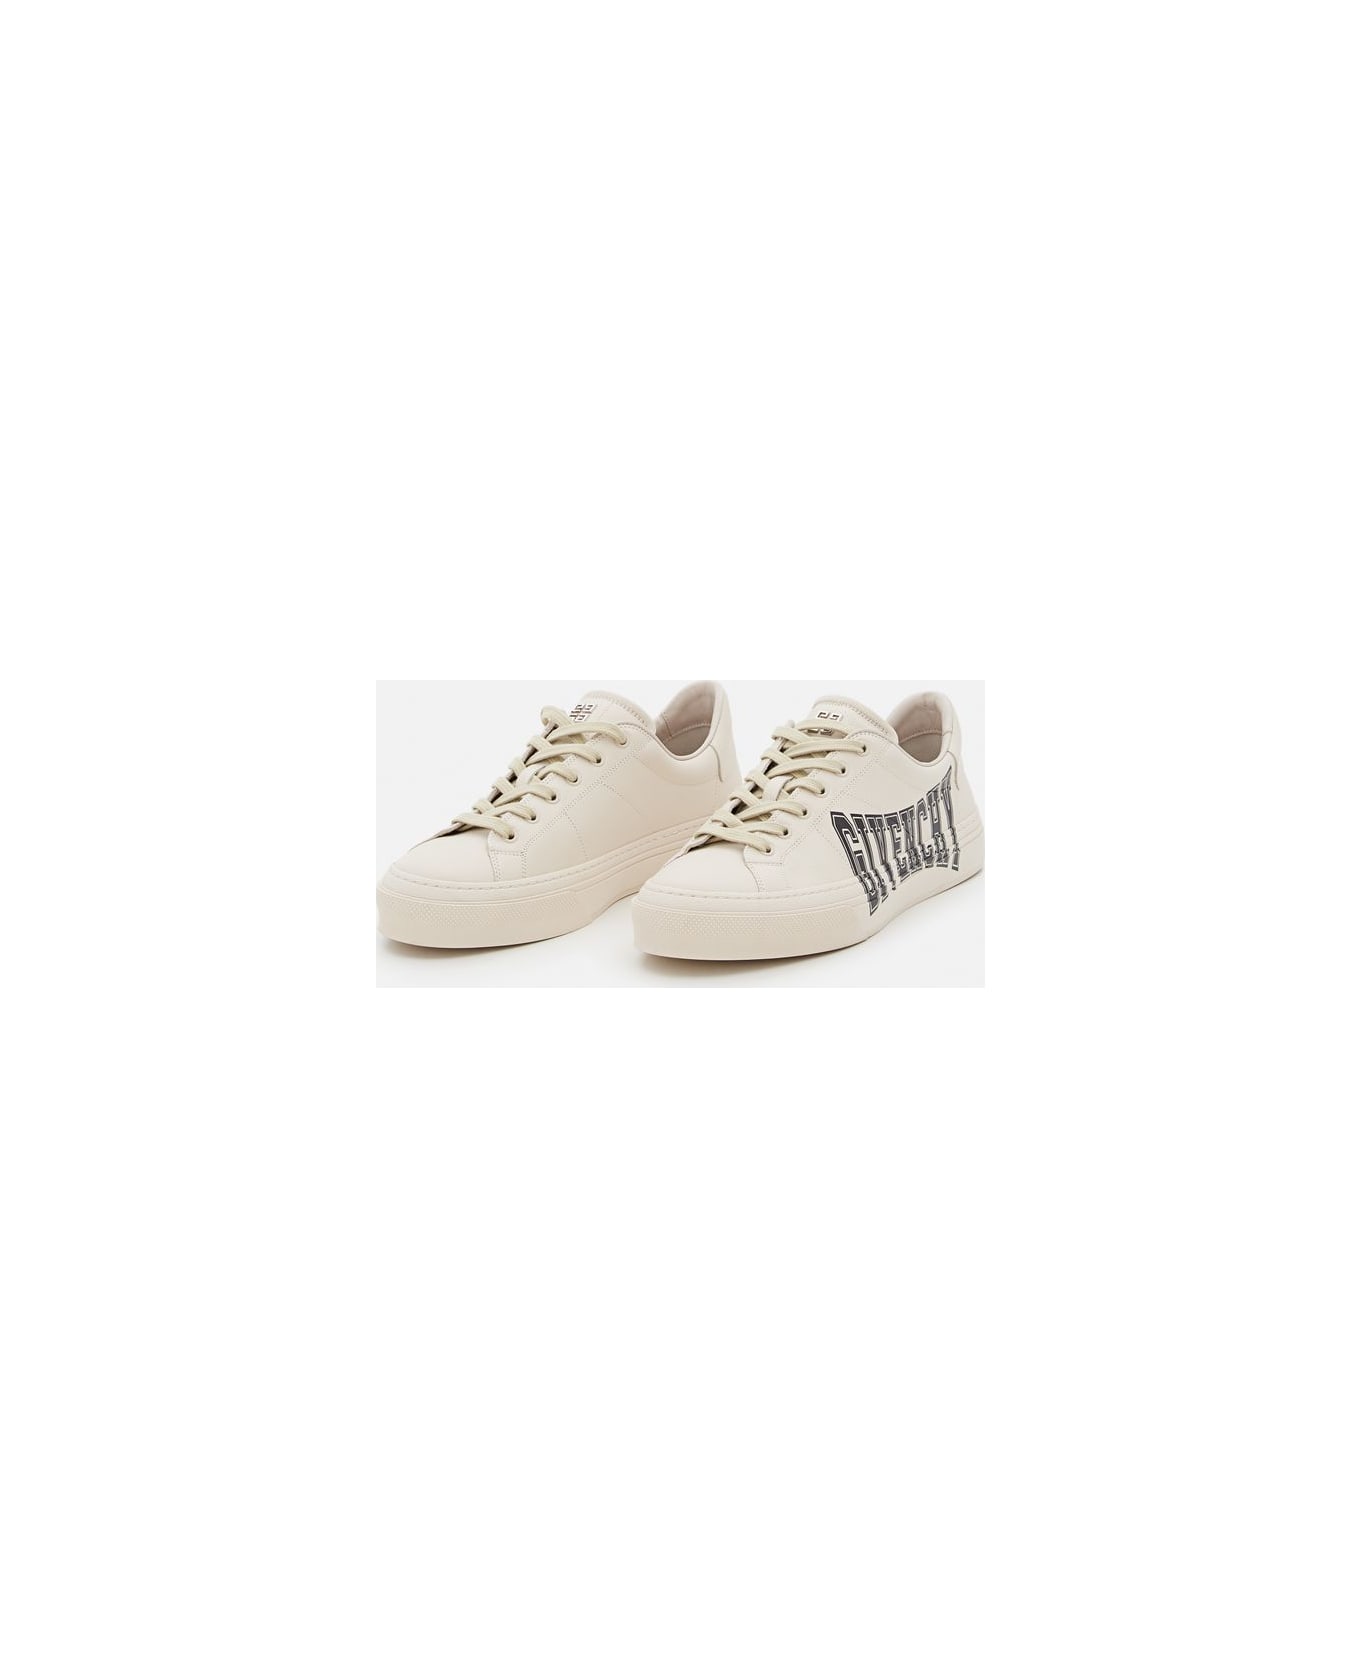 Givenchy Lace-up Sneakers - Beige